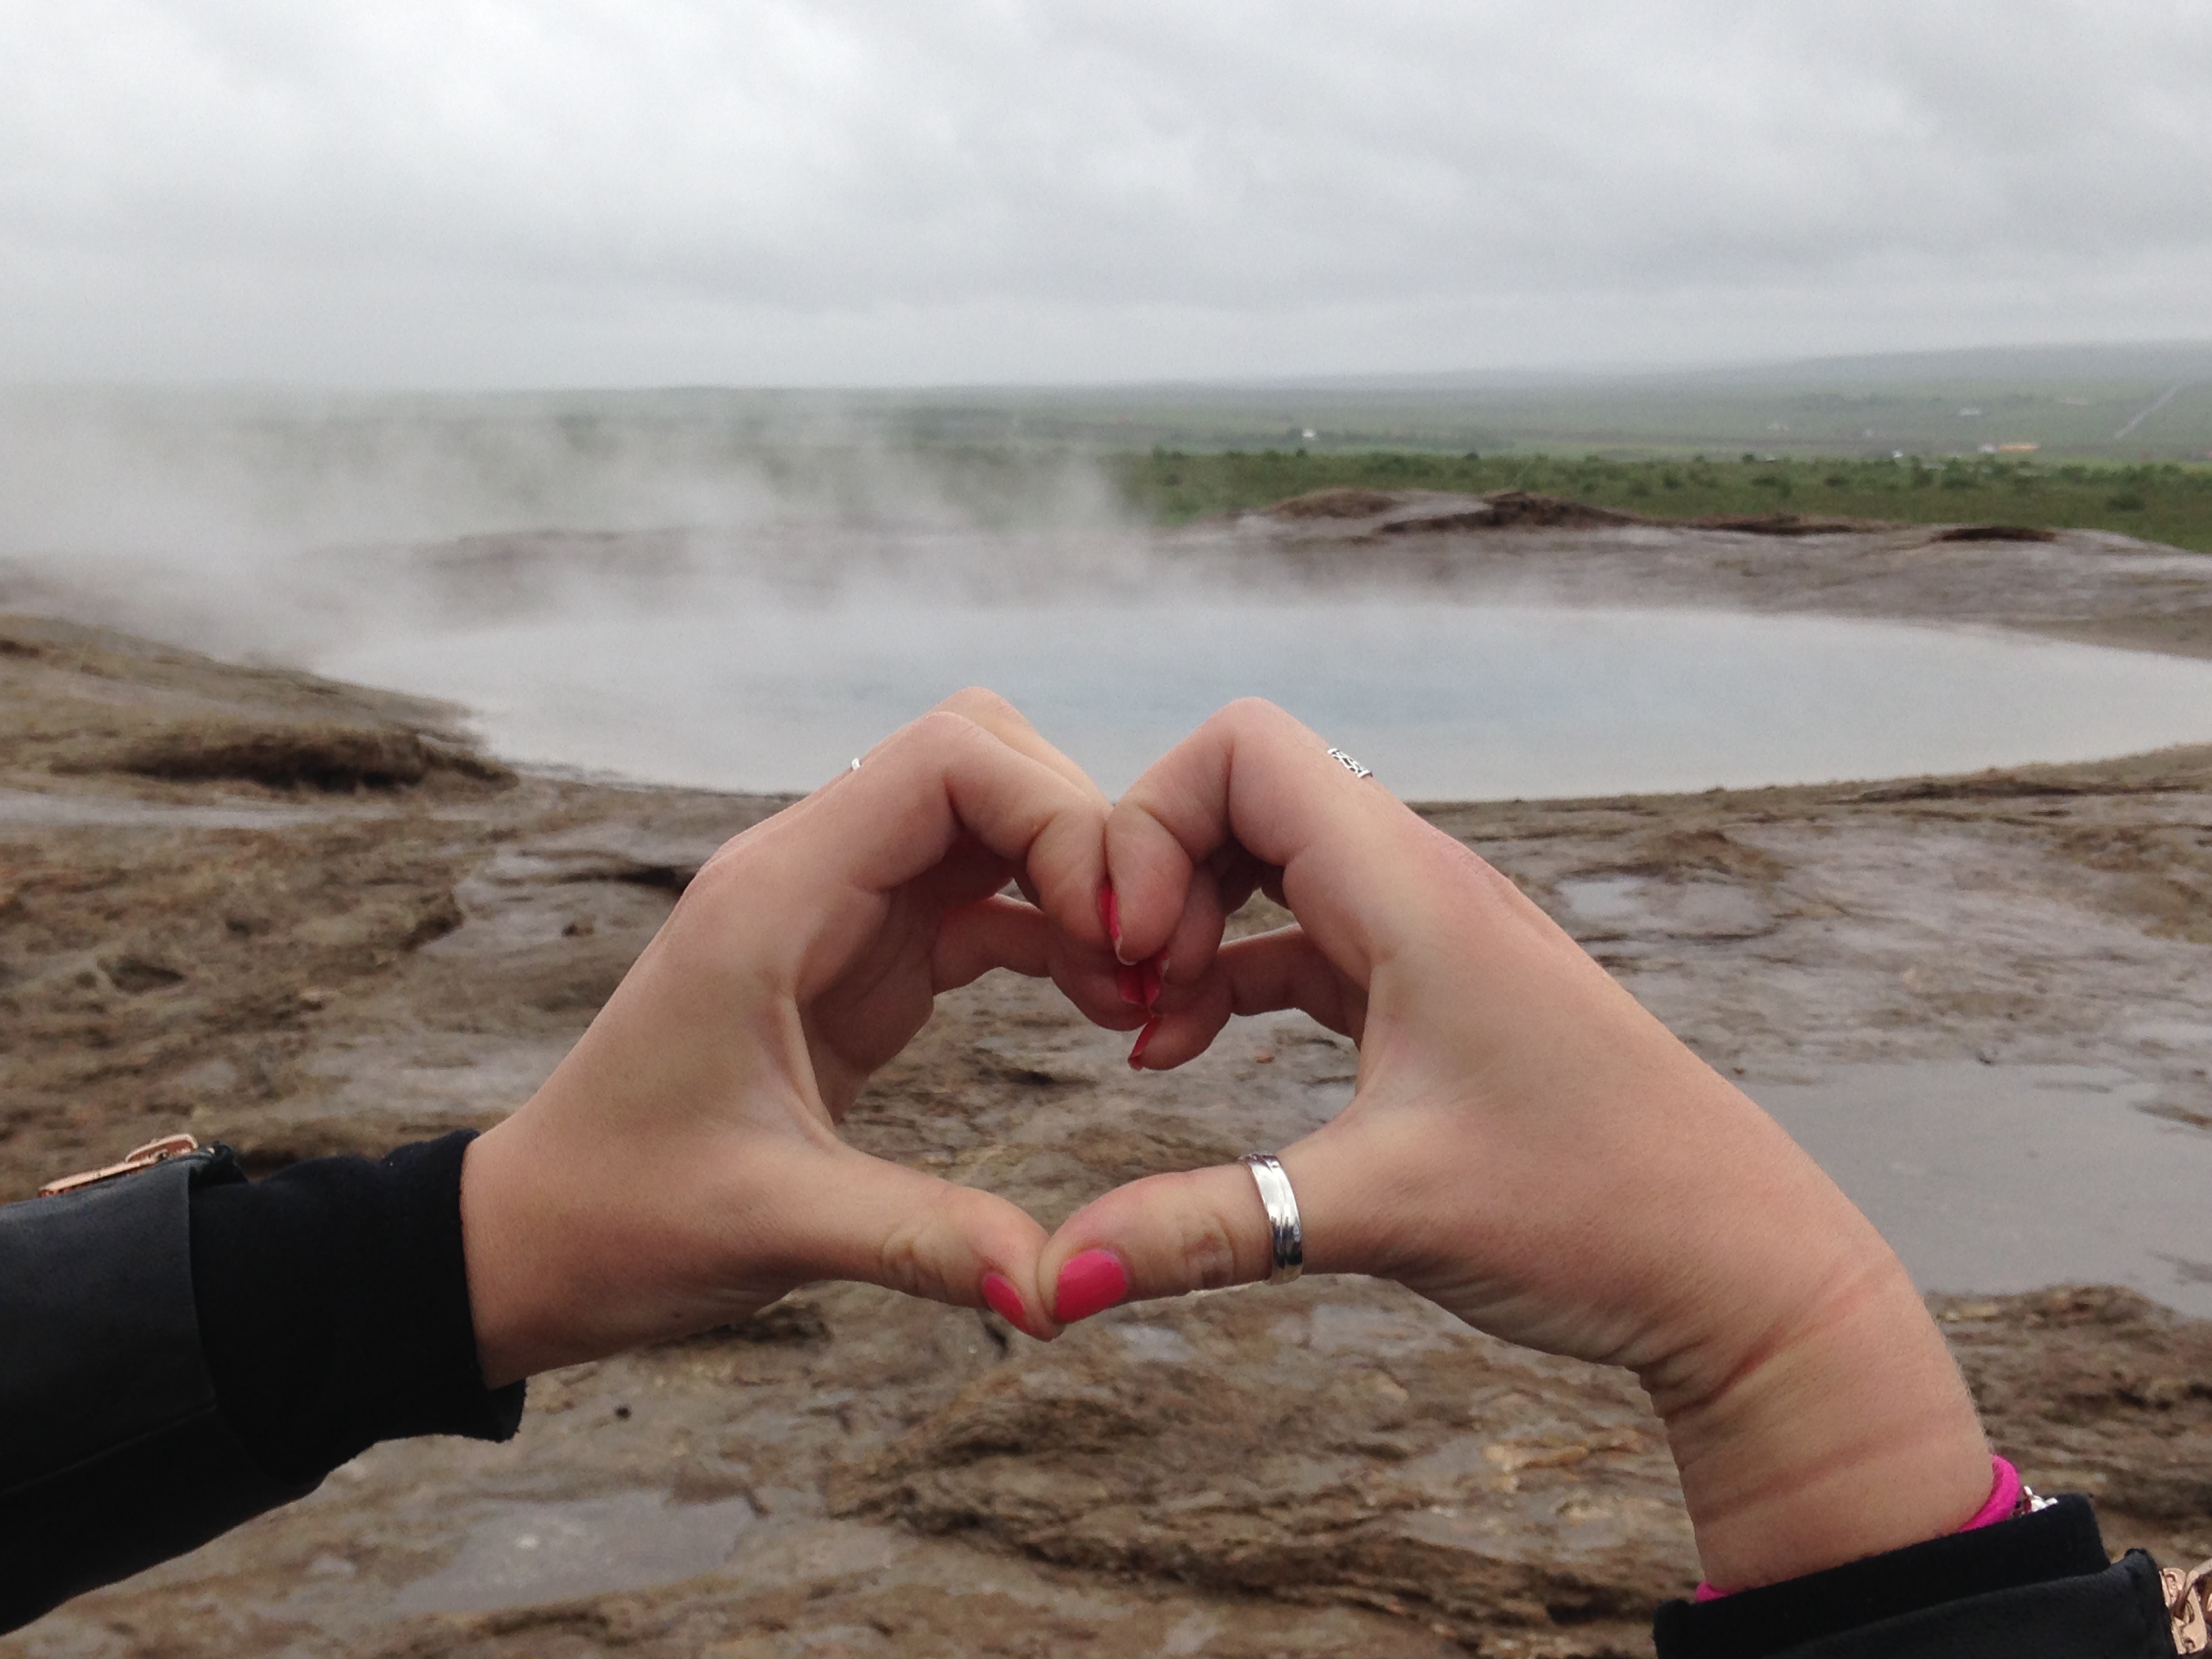 A Hot and Steamy Date with an Icelandic Geysir